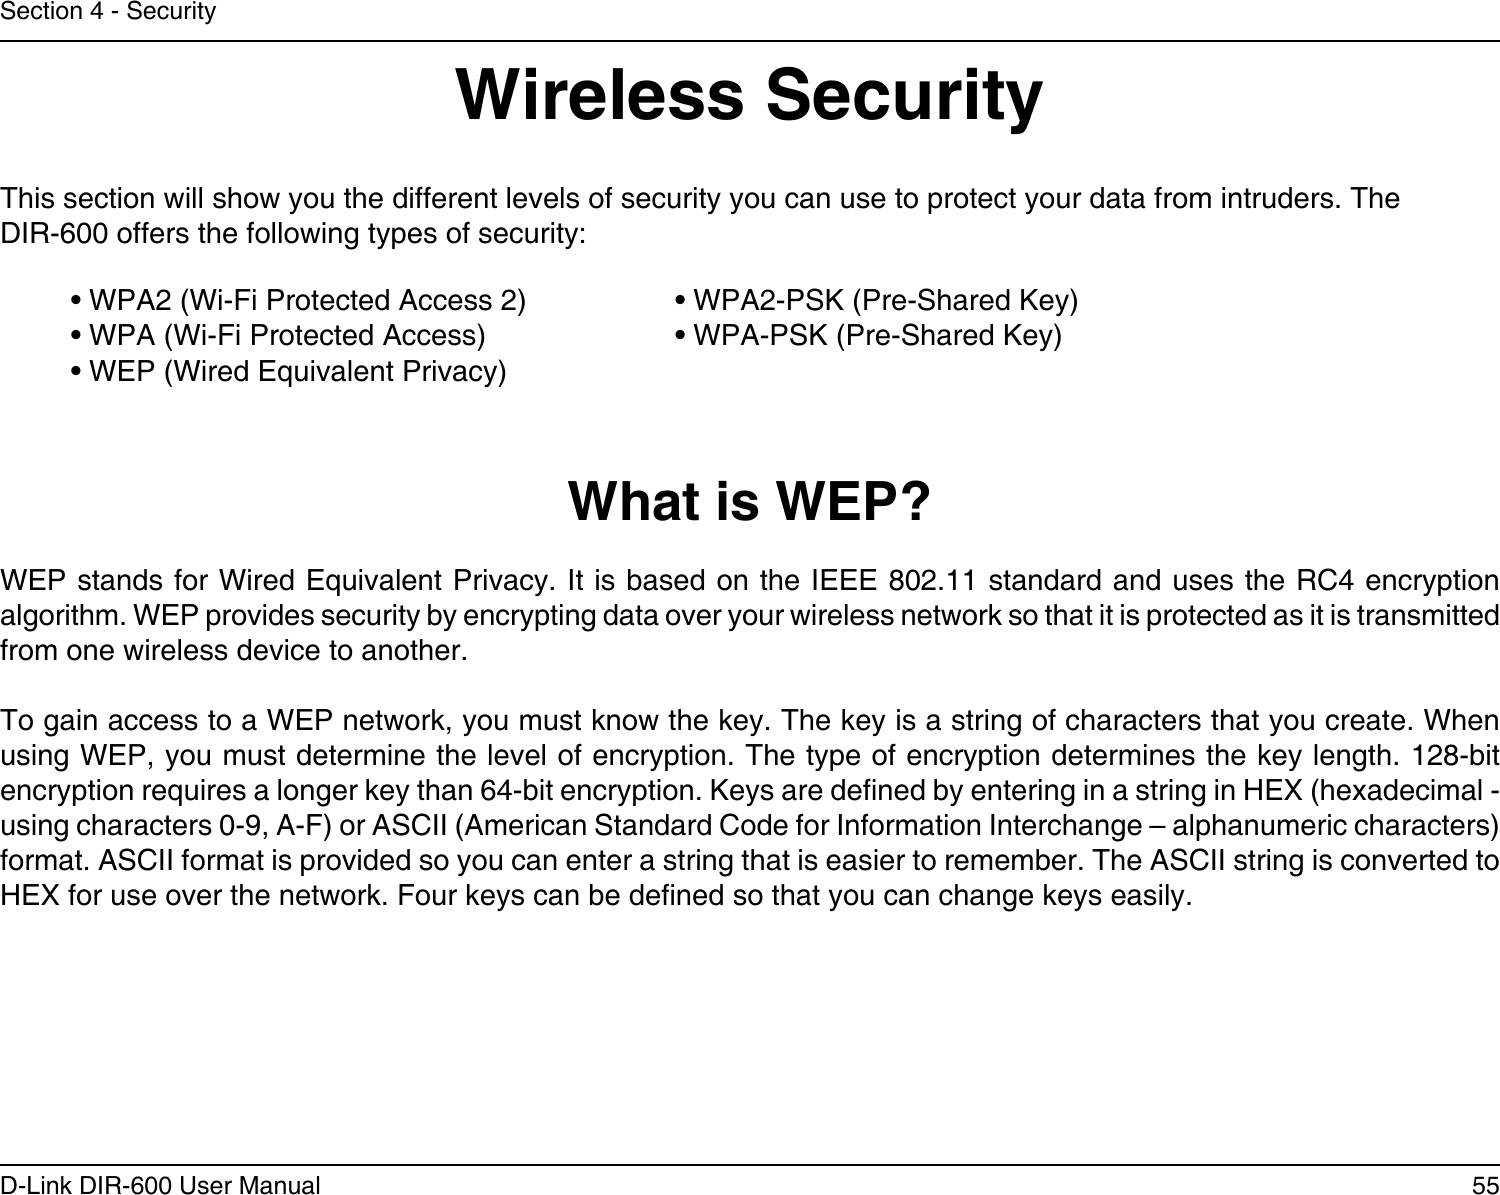 55D-Link DIR-600 User ManualSection 4 - SecurityWireless SecurityThis section will show you the different levels of security you can use to protect your data from intruders. The DIR-600 offers the following types of security:• WPA2 (Wi-Fi Protected Access 2)     • WPA2-PSK (Pre-Shared Key)• WPA (Wi-Fi Protected Access)      • WPA-PSK (Pre-Shared Key)• WEP (Wired Equivalent Privacy)What is WEP?WEP stands for Wired Equivalent Privacy. It is based on the IEEE 802.11 standard and uses the RC4 encryption algorithm. WEP provides security by encrypting data over your wireless network so that it is protected as it is transmitted from one wireless device to another.To gain access to a WEP network, you must know the key. The key is a string of characters that you create. When using WEP, you must determine the level of encryption. The type of encryption determines the key length. 128-bit encryption requires a longer key than 64-bit encryption. Keys are dened by entering in a string in HEX (hexadecimal - using characters 0-9, A-F) or ASCII (American Standard Code for Information Interchange – alphanumeric characters) format. ASCII format is provided so you can enter a string that is easier to remember. The ASCII string is converted to HEX for use over the network. Four keys can be dened so that you can change keys easily.